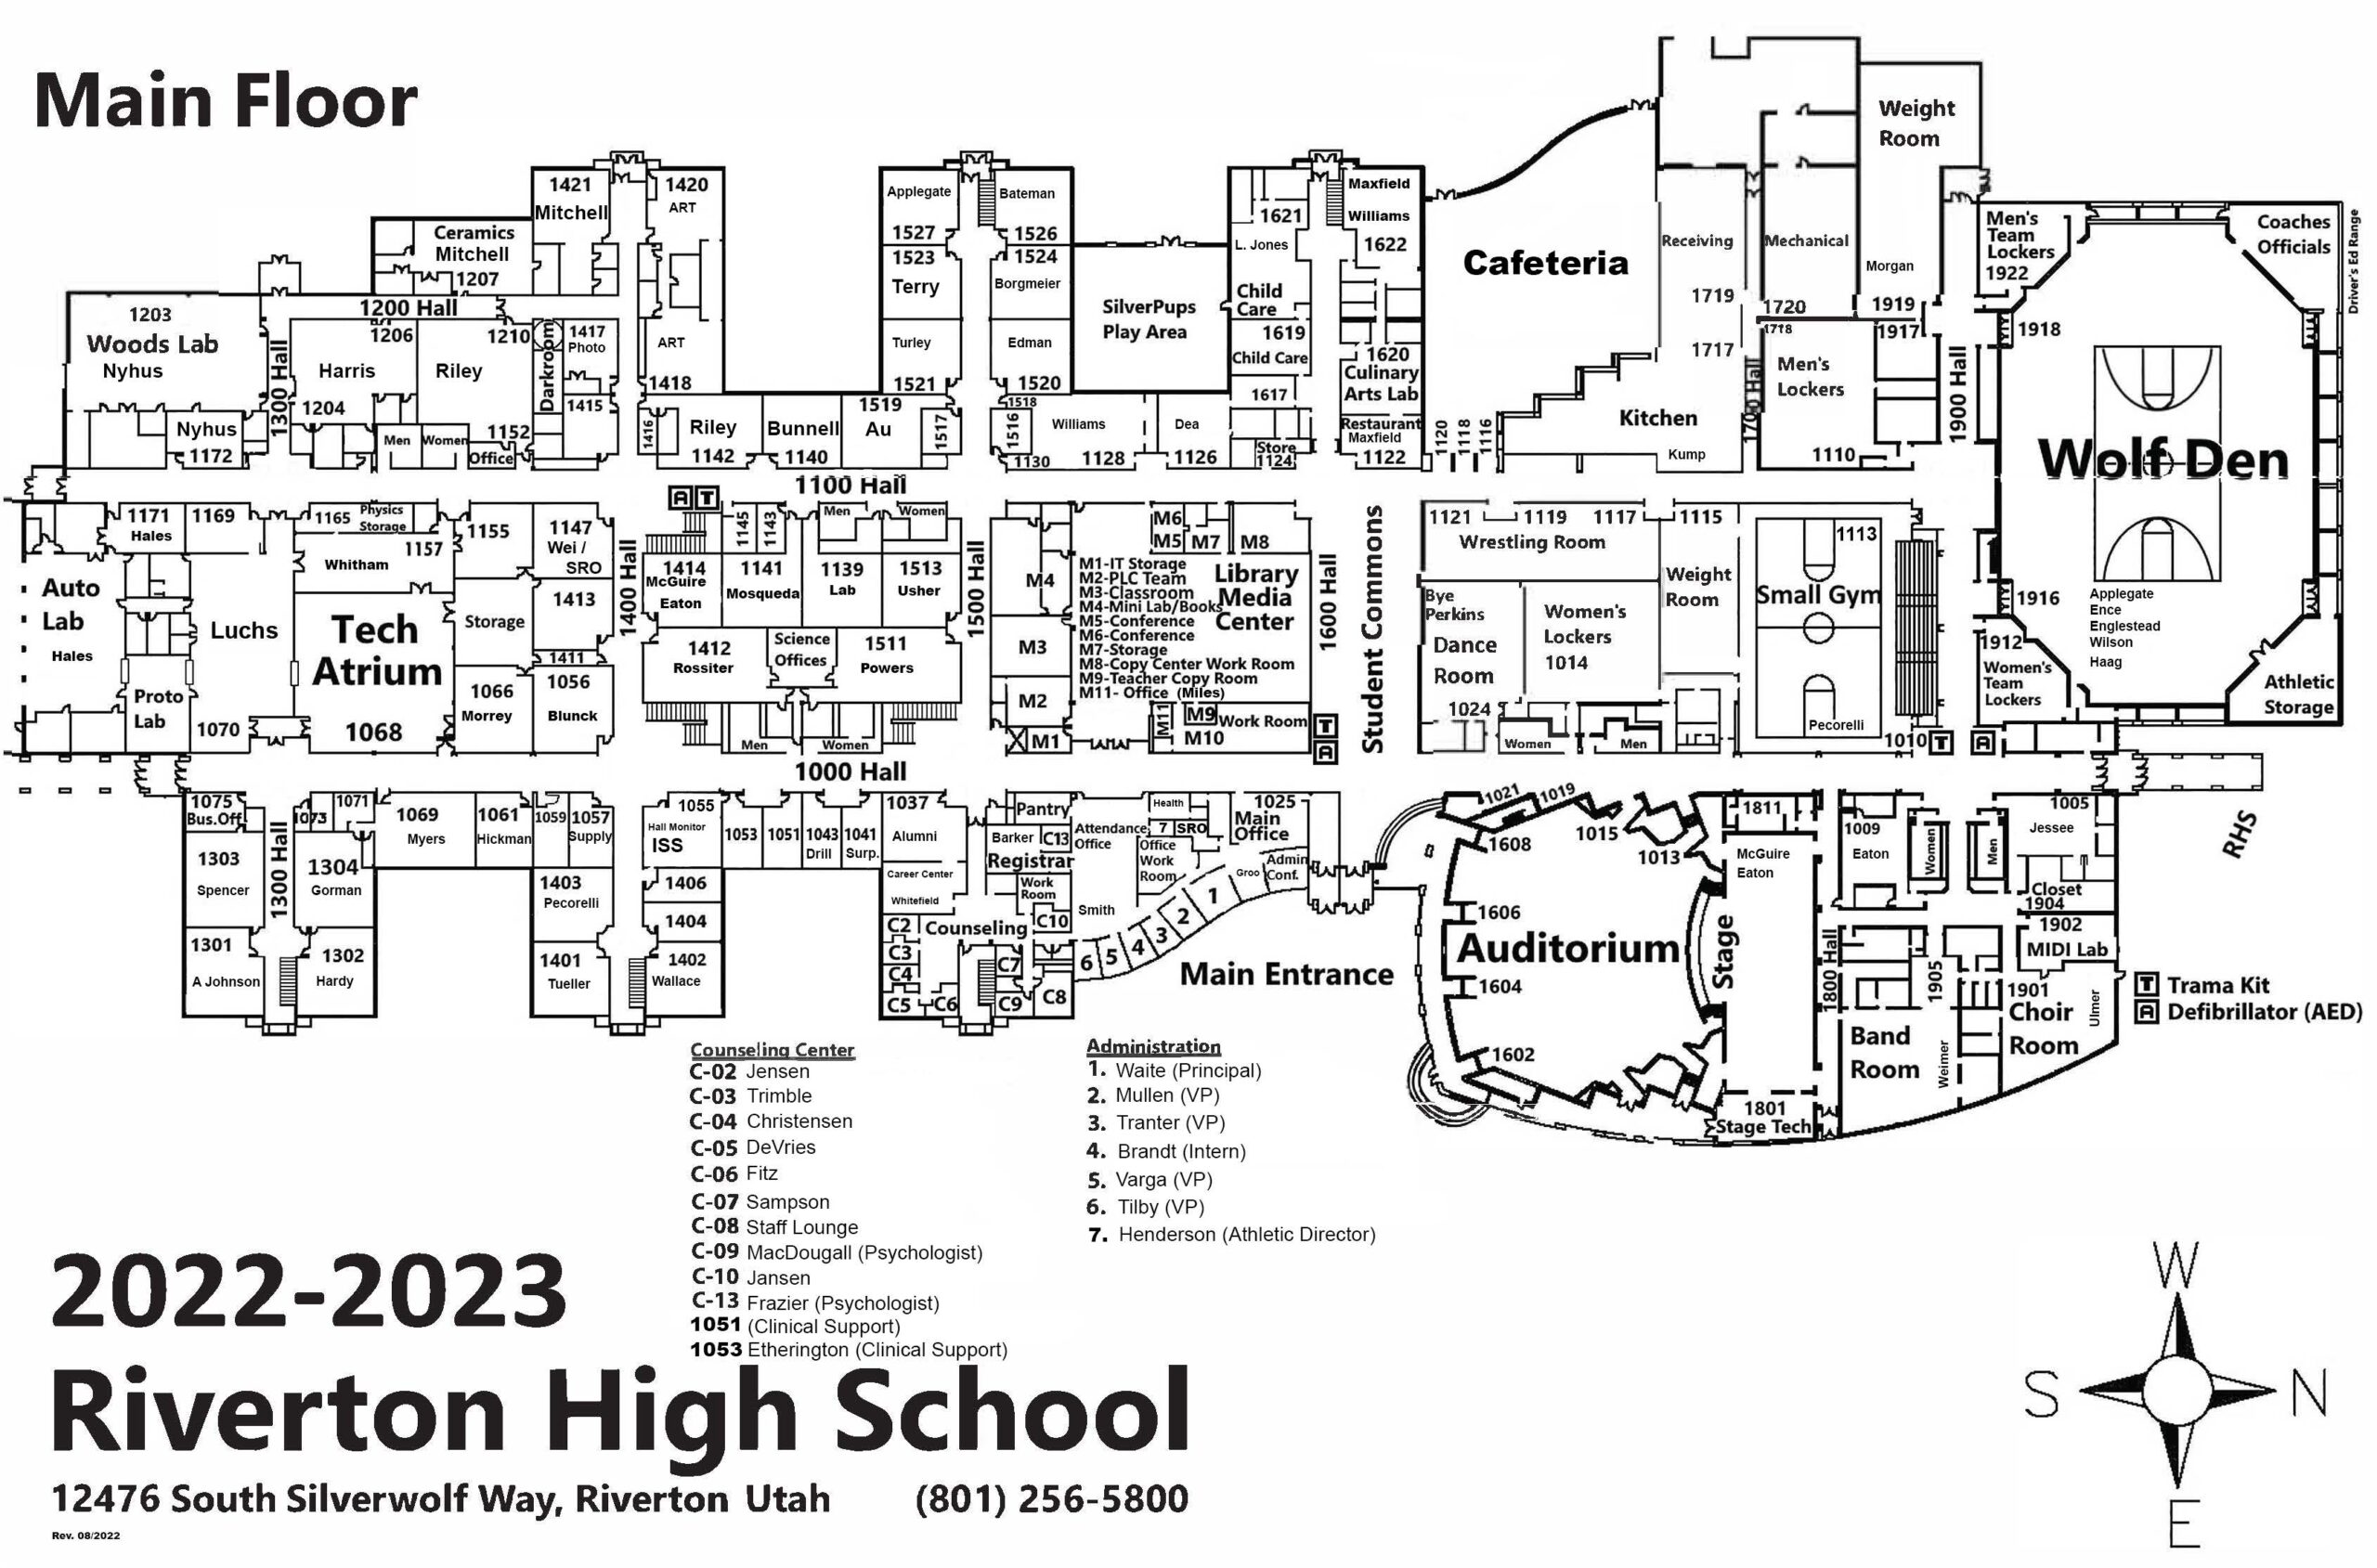 RHS Map 2022 23 Page 1 Scaled 